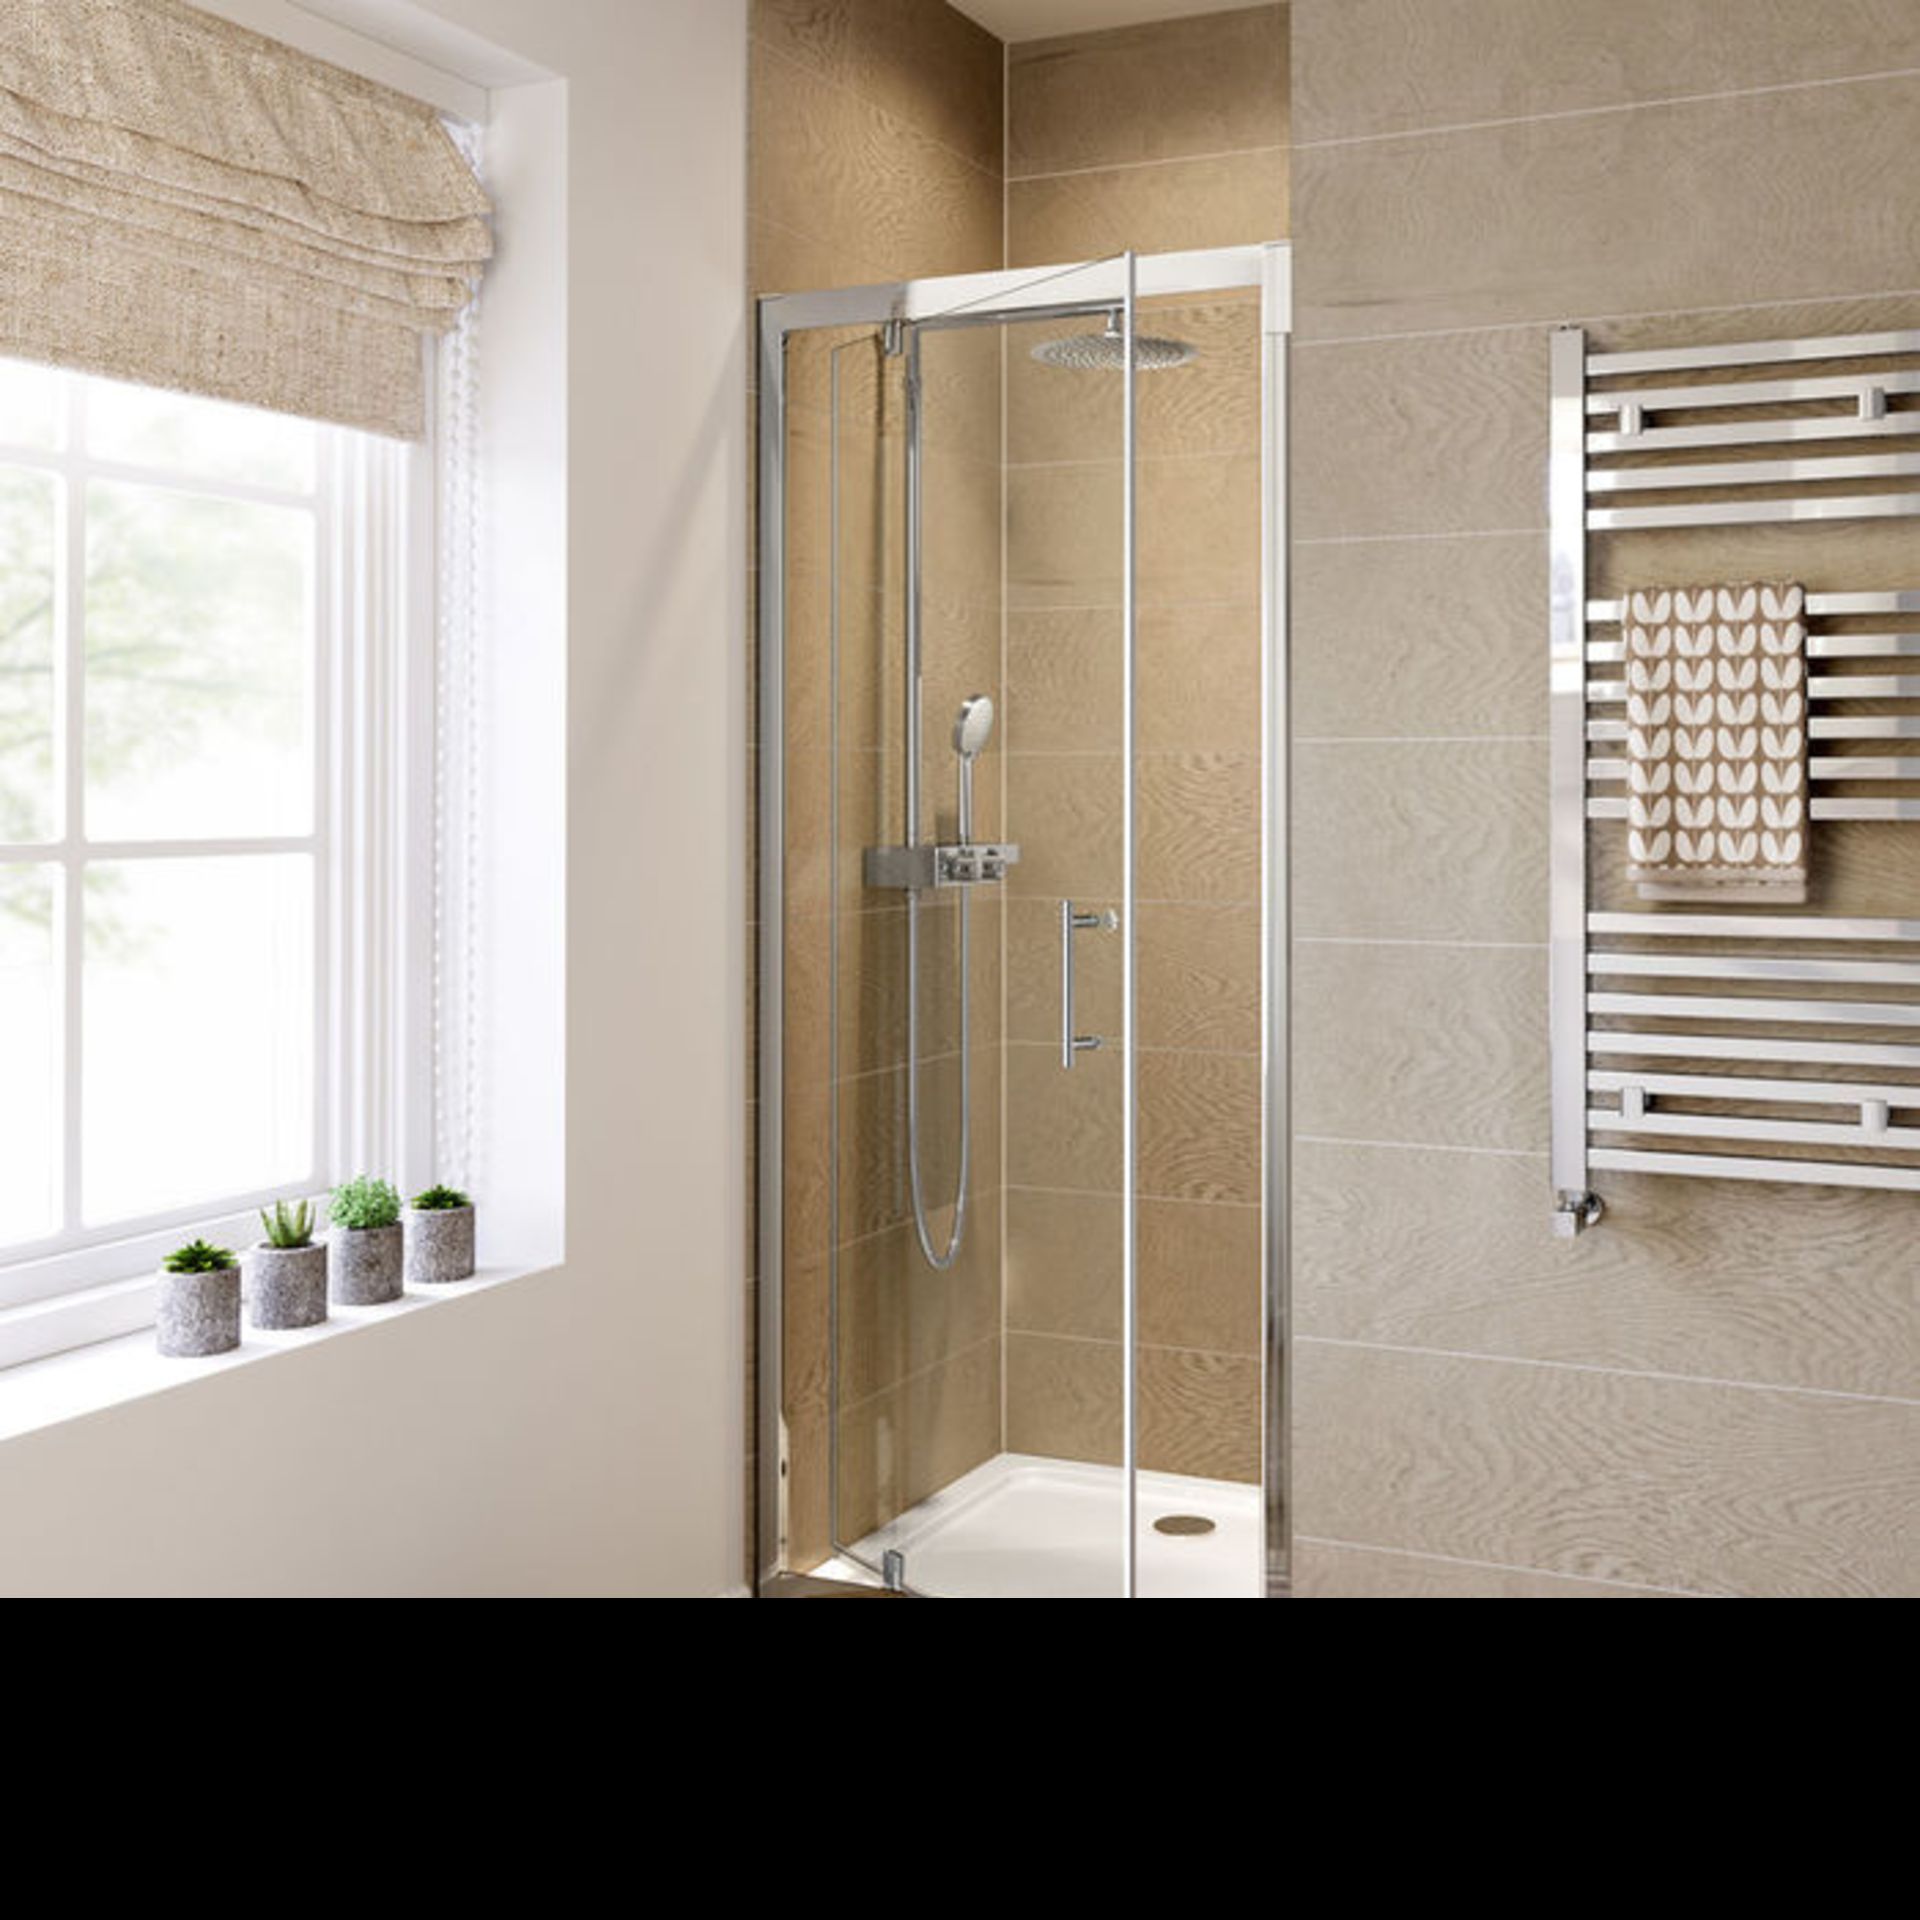 New 700mm - 6mm - Premium Pivot Shower Door. RRP £299.99.8mm Safety Glass Fully Waterproof Te... - Image 2 of 2